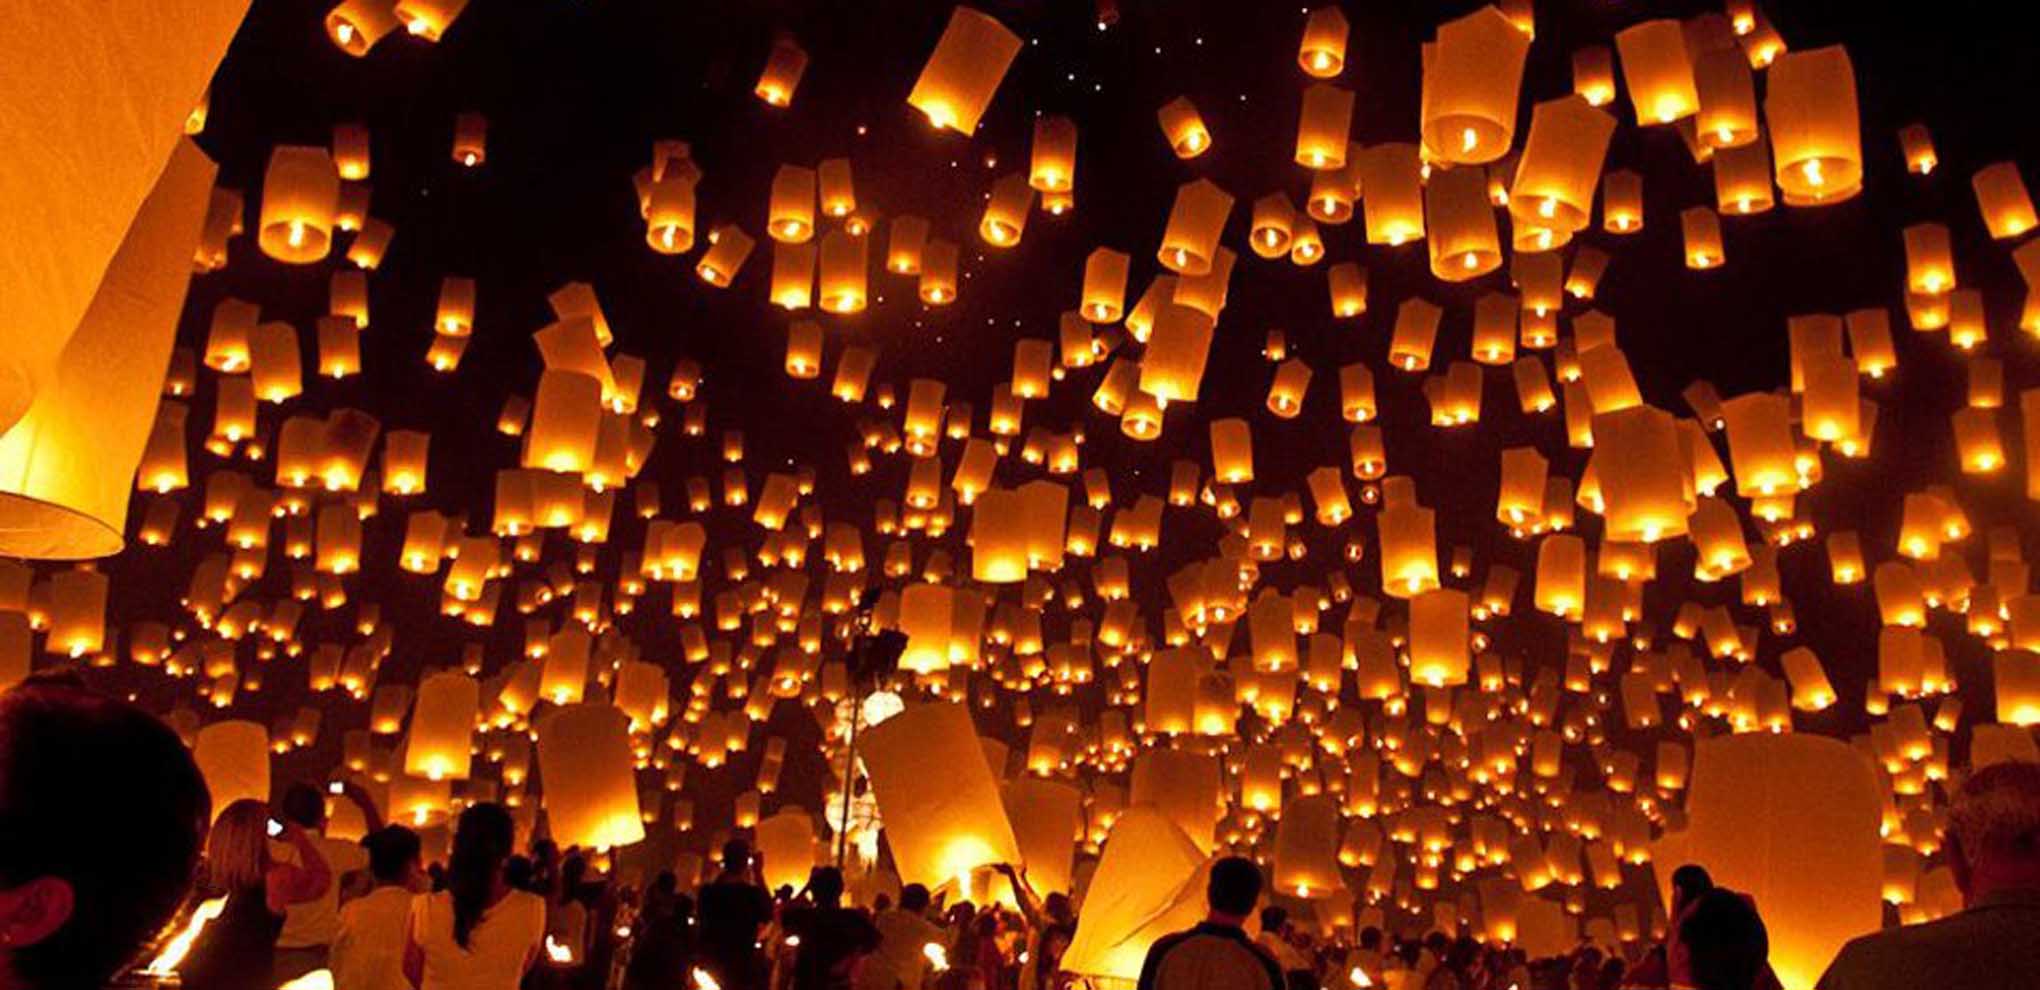 An open letter to Steph, who sent a sky lantern to her father ...